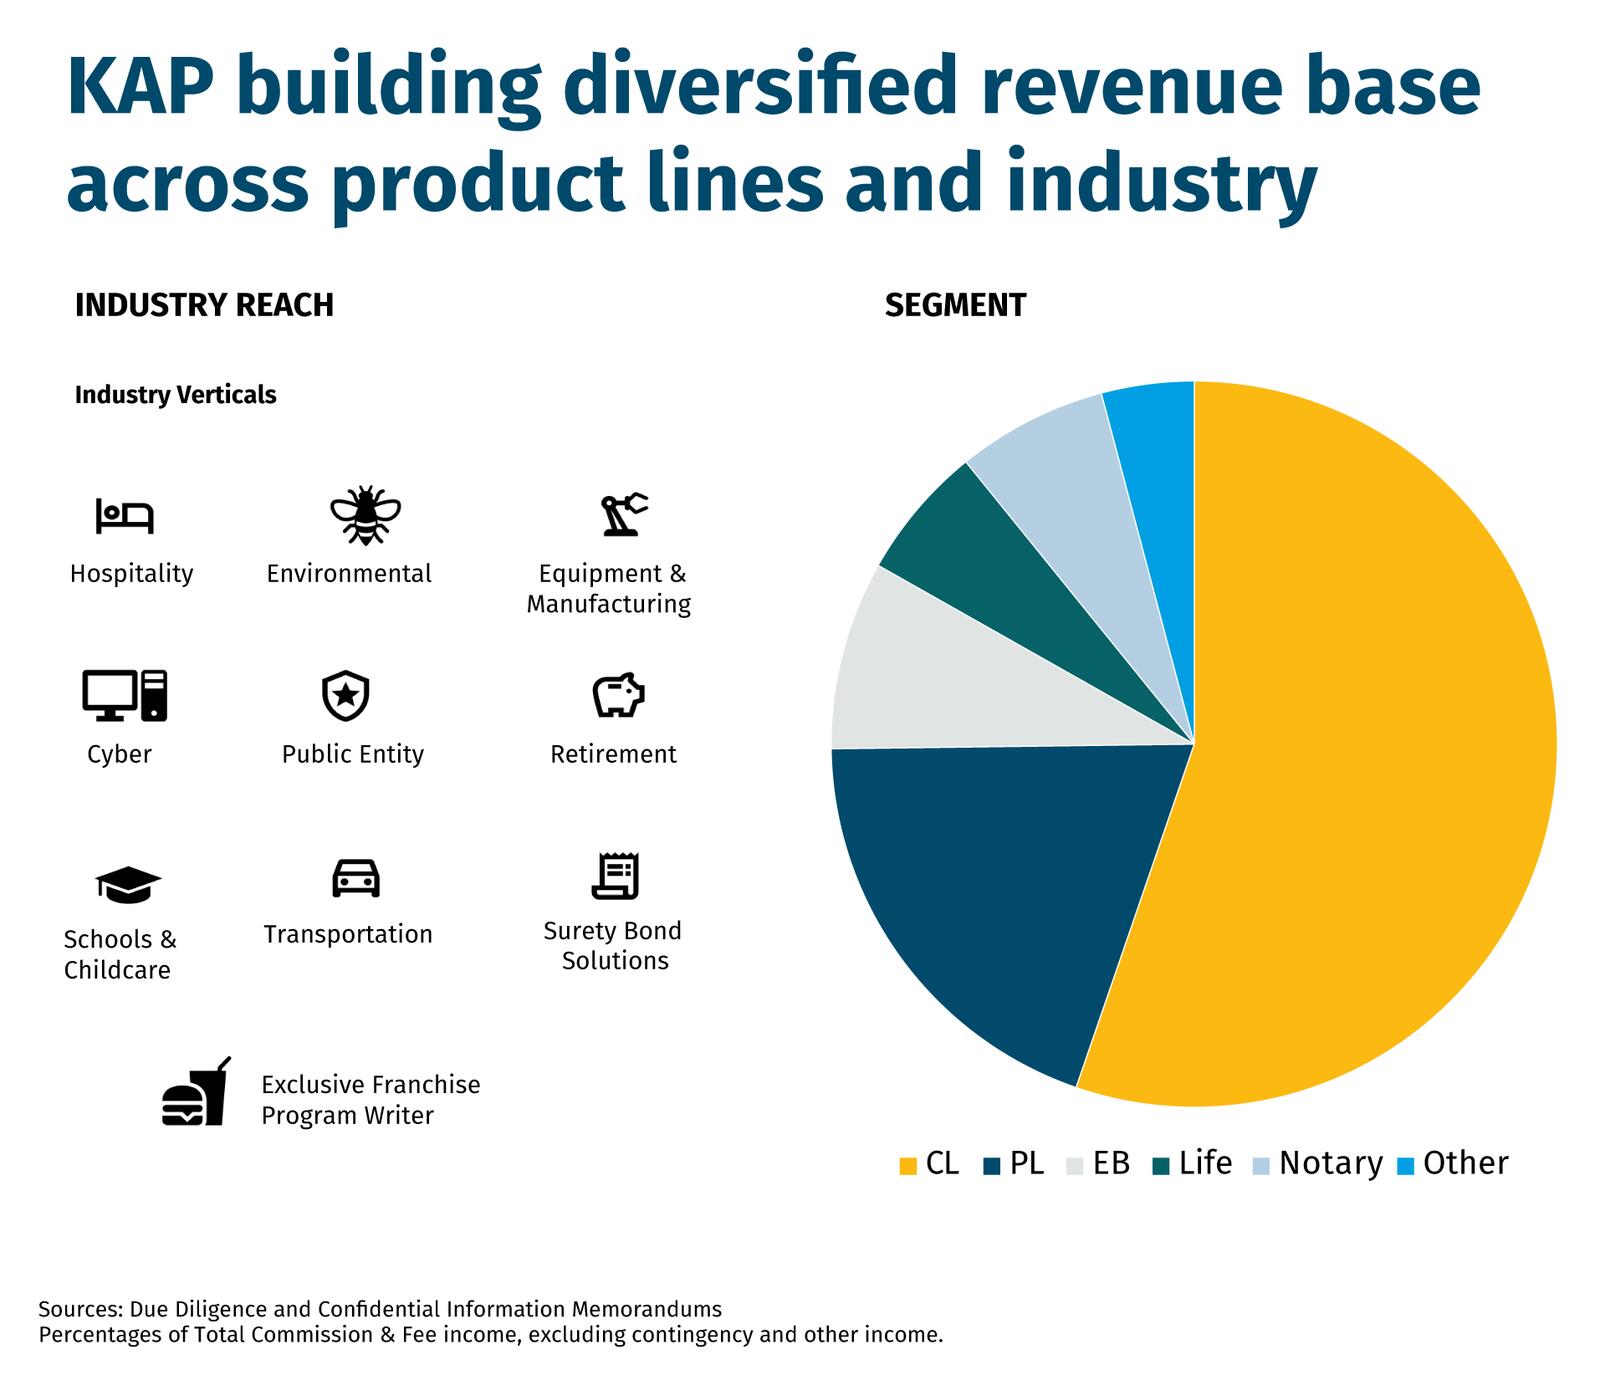 KAP-building-diversified-revenue-base-across-product-lines-and-industry